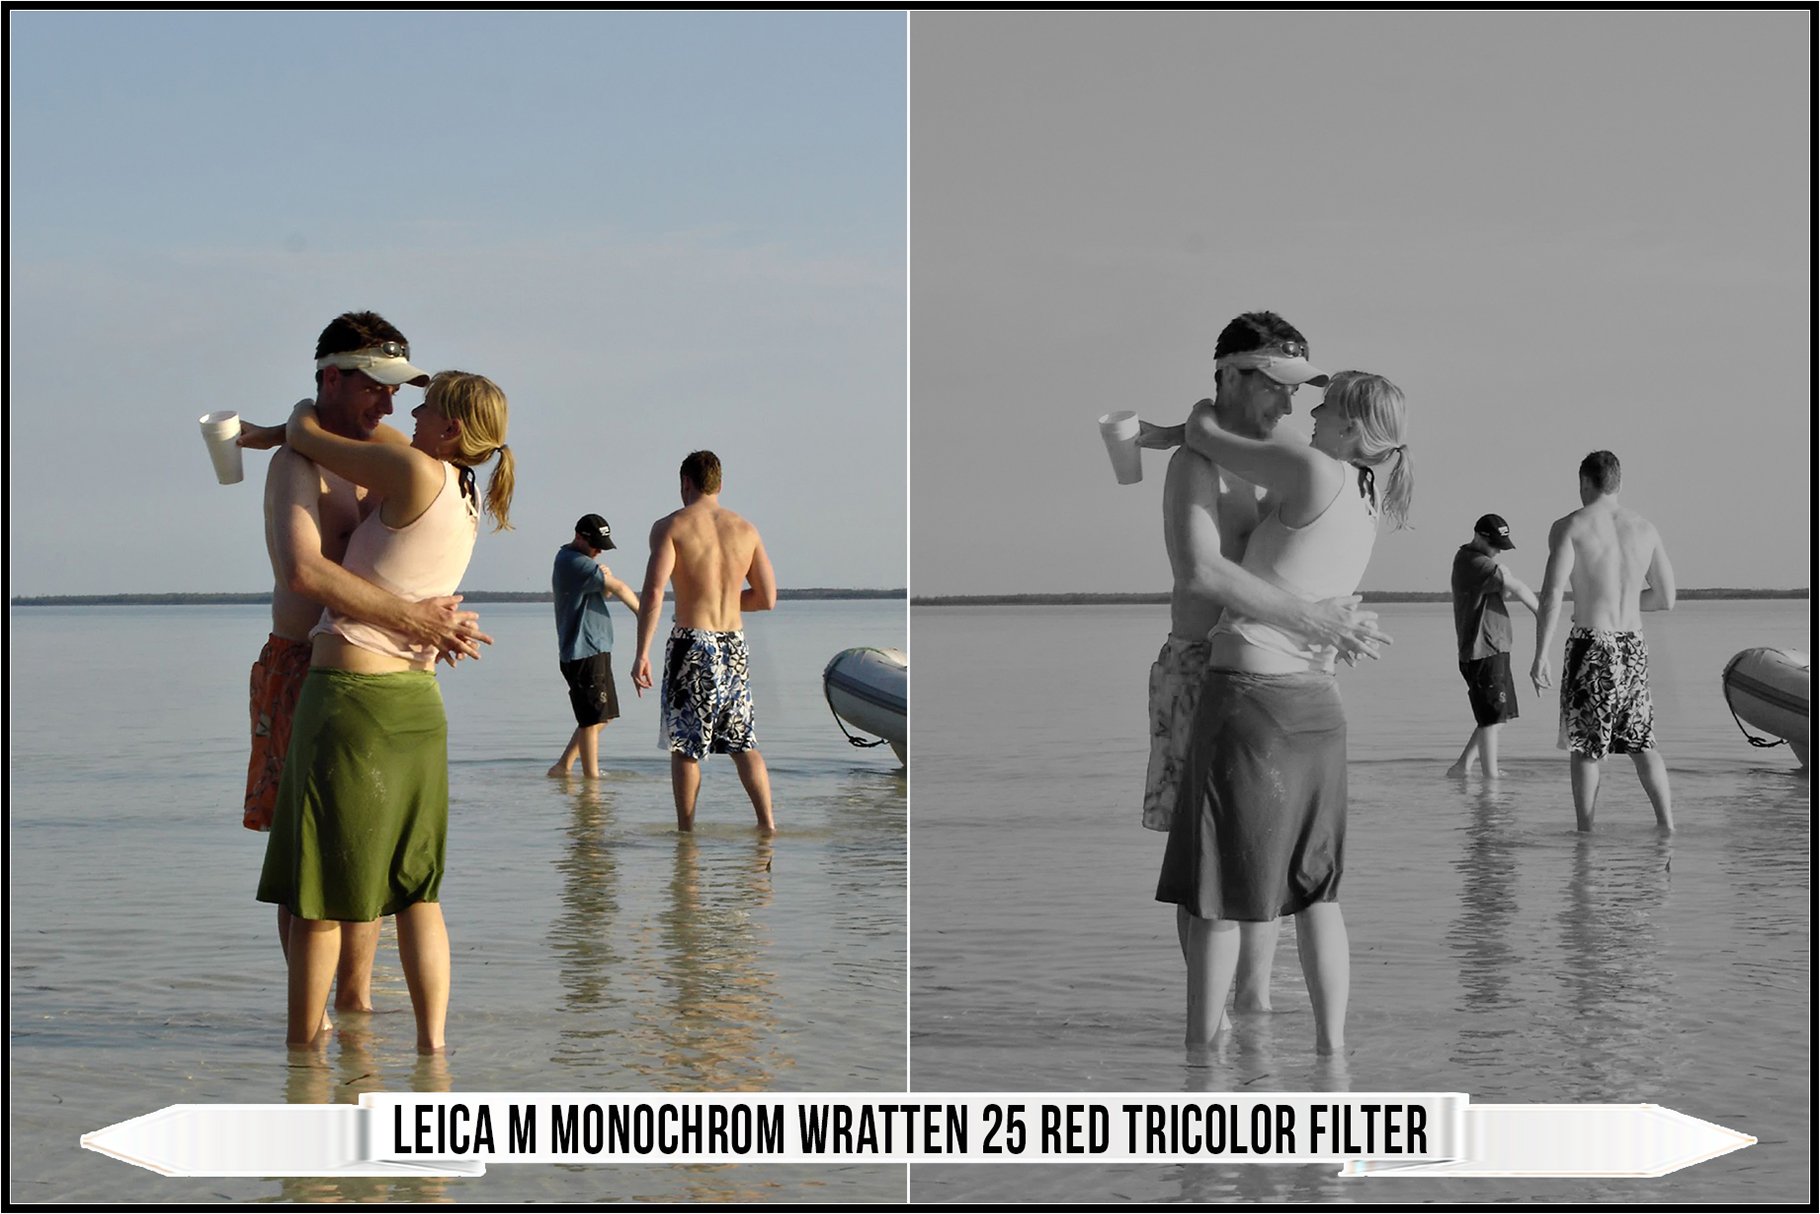 leica m monochrom wratten 25 red tricolor filter 592